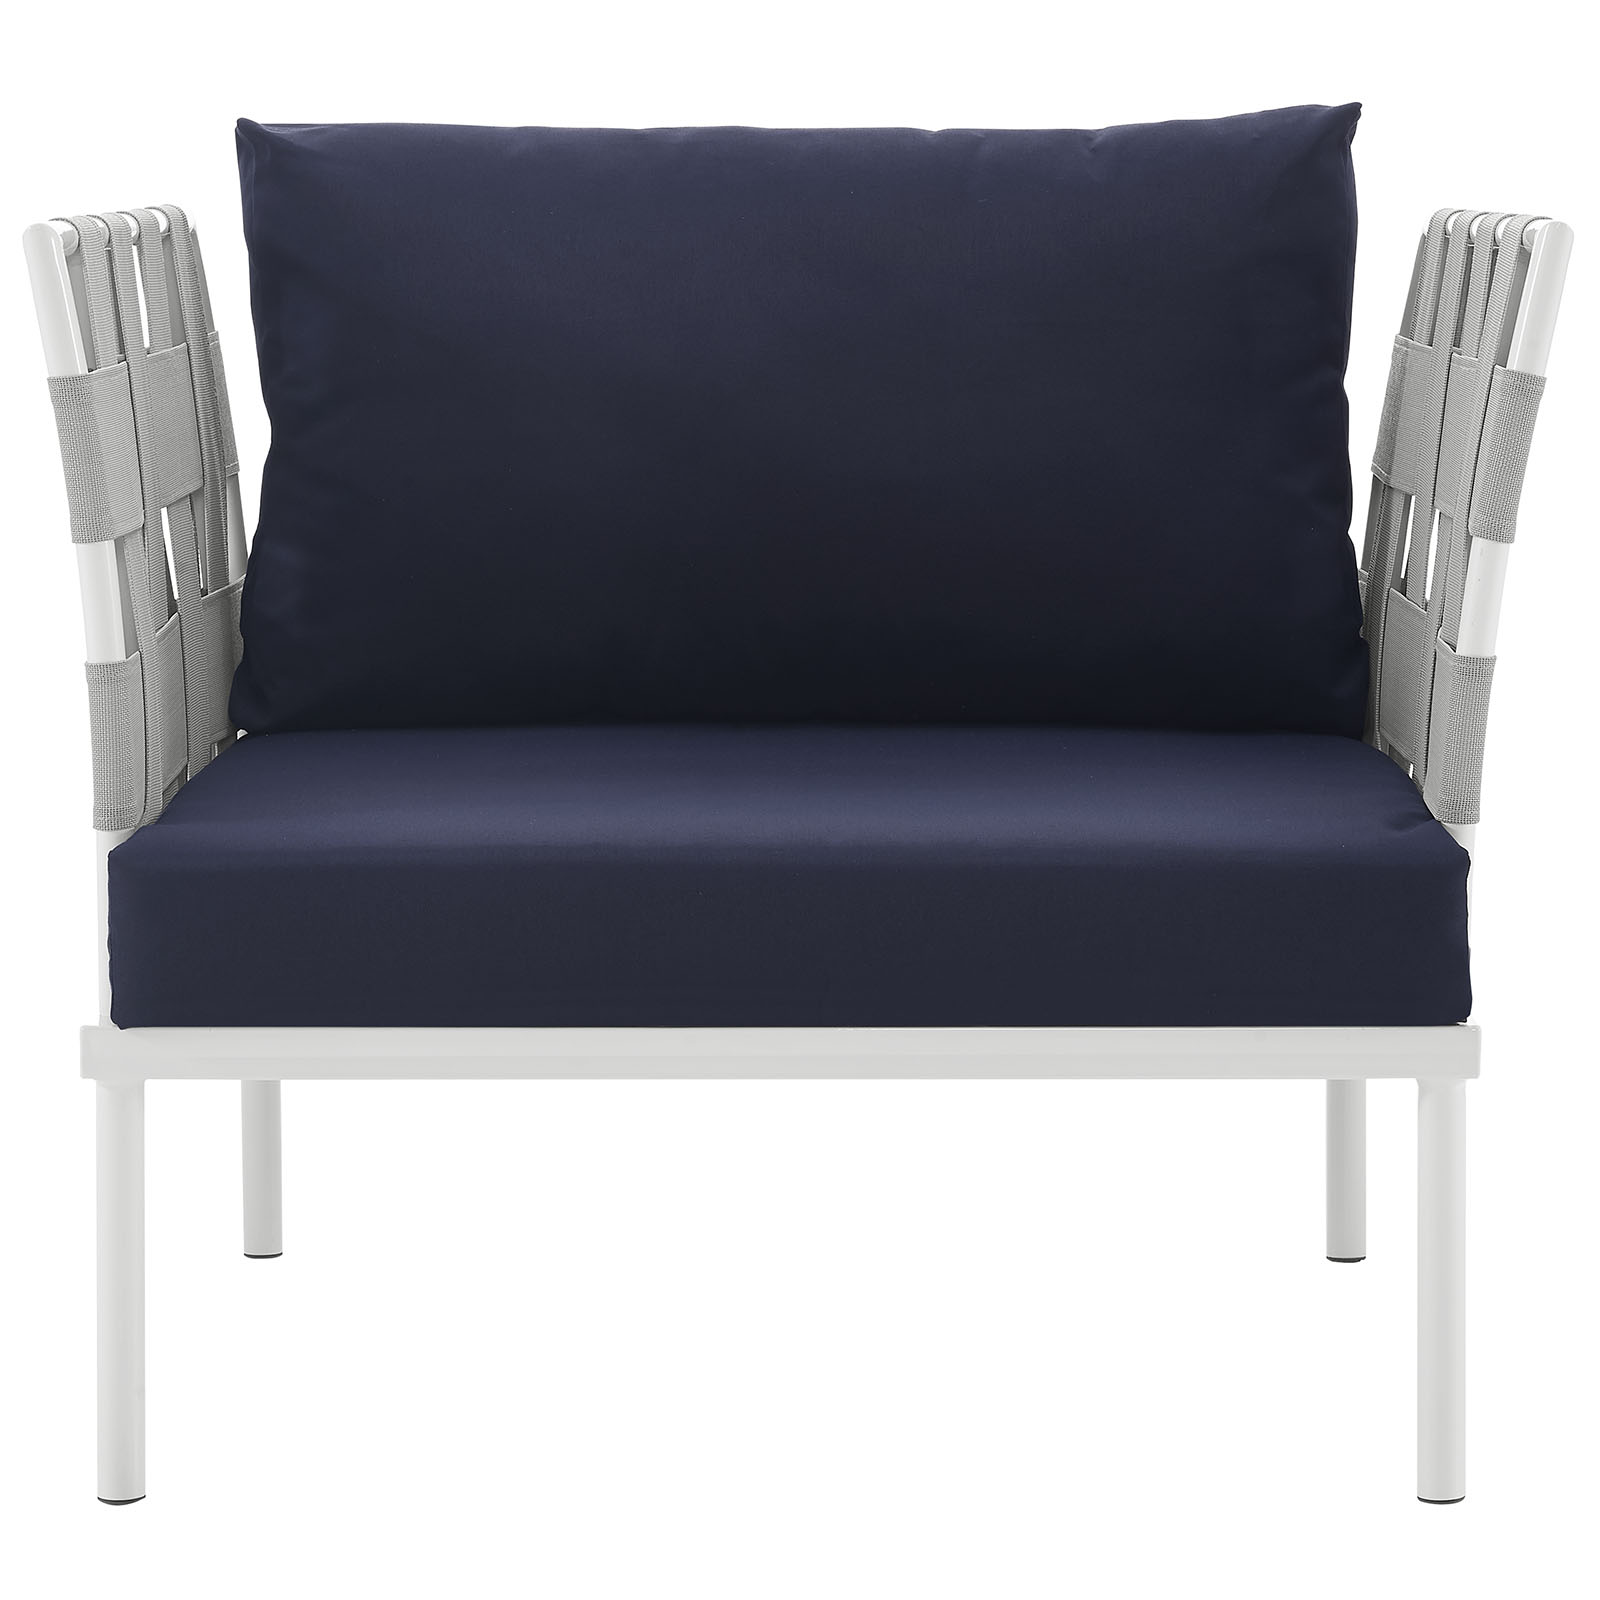 Modern Contemporary Urban Design Outdoor Patio Balcony Lounge Chair, Navy Blue White, Rattan - image 5 of 5